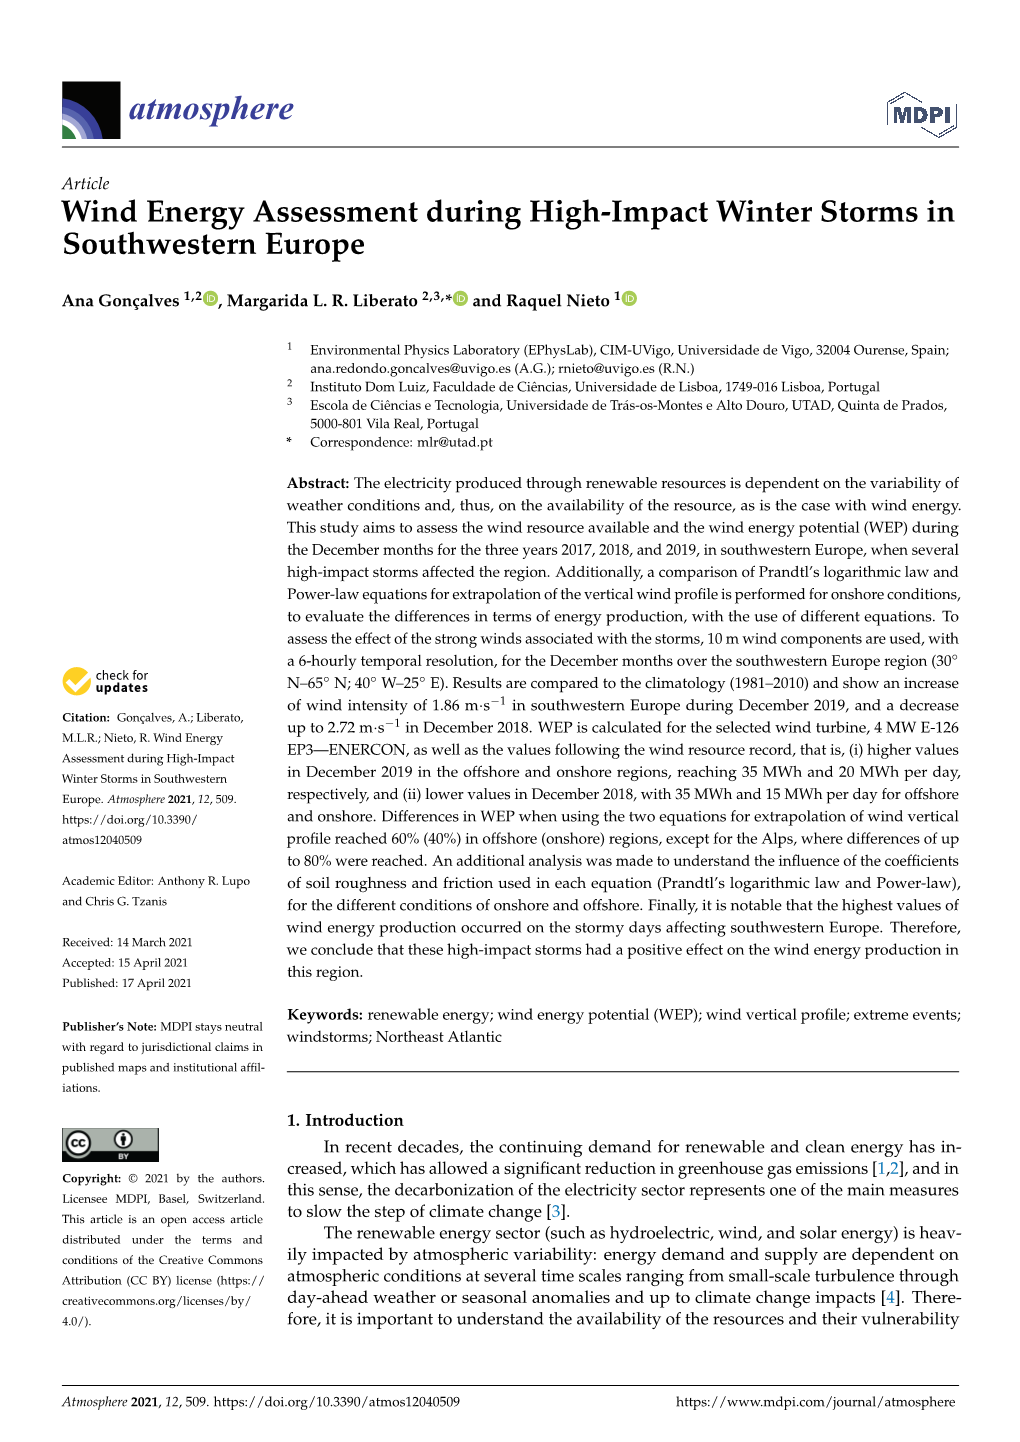 Wind Energy Assessment During High-Impact Winter Storms in Southwestern Europe